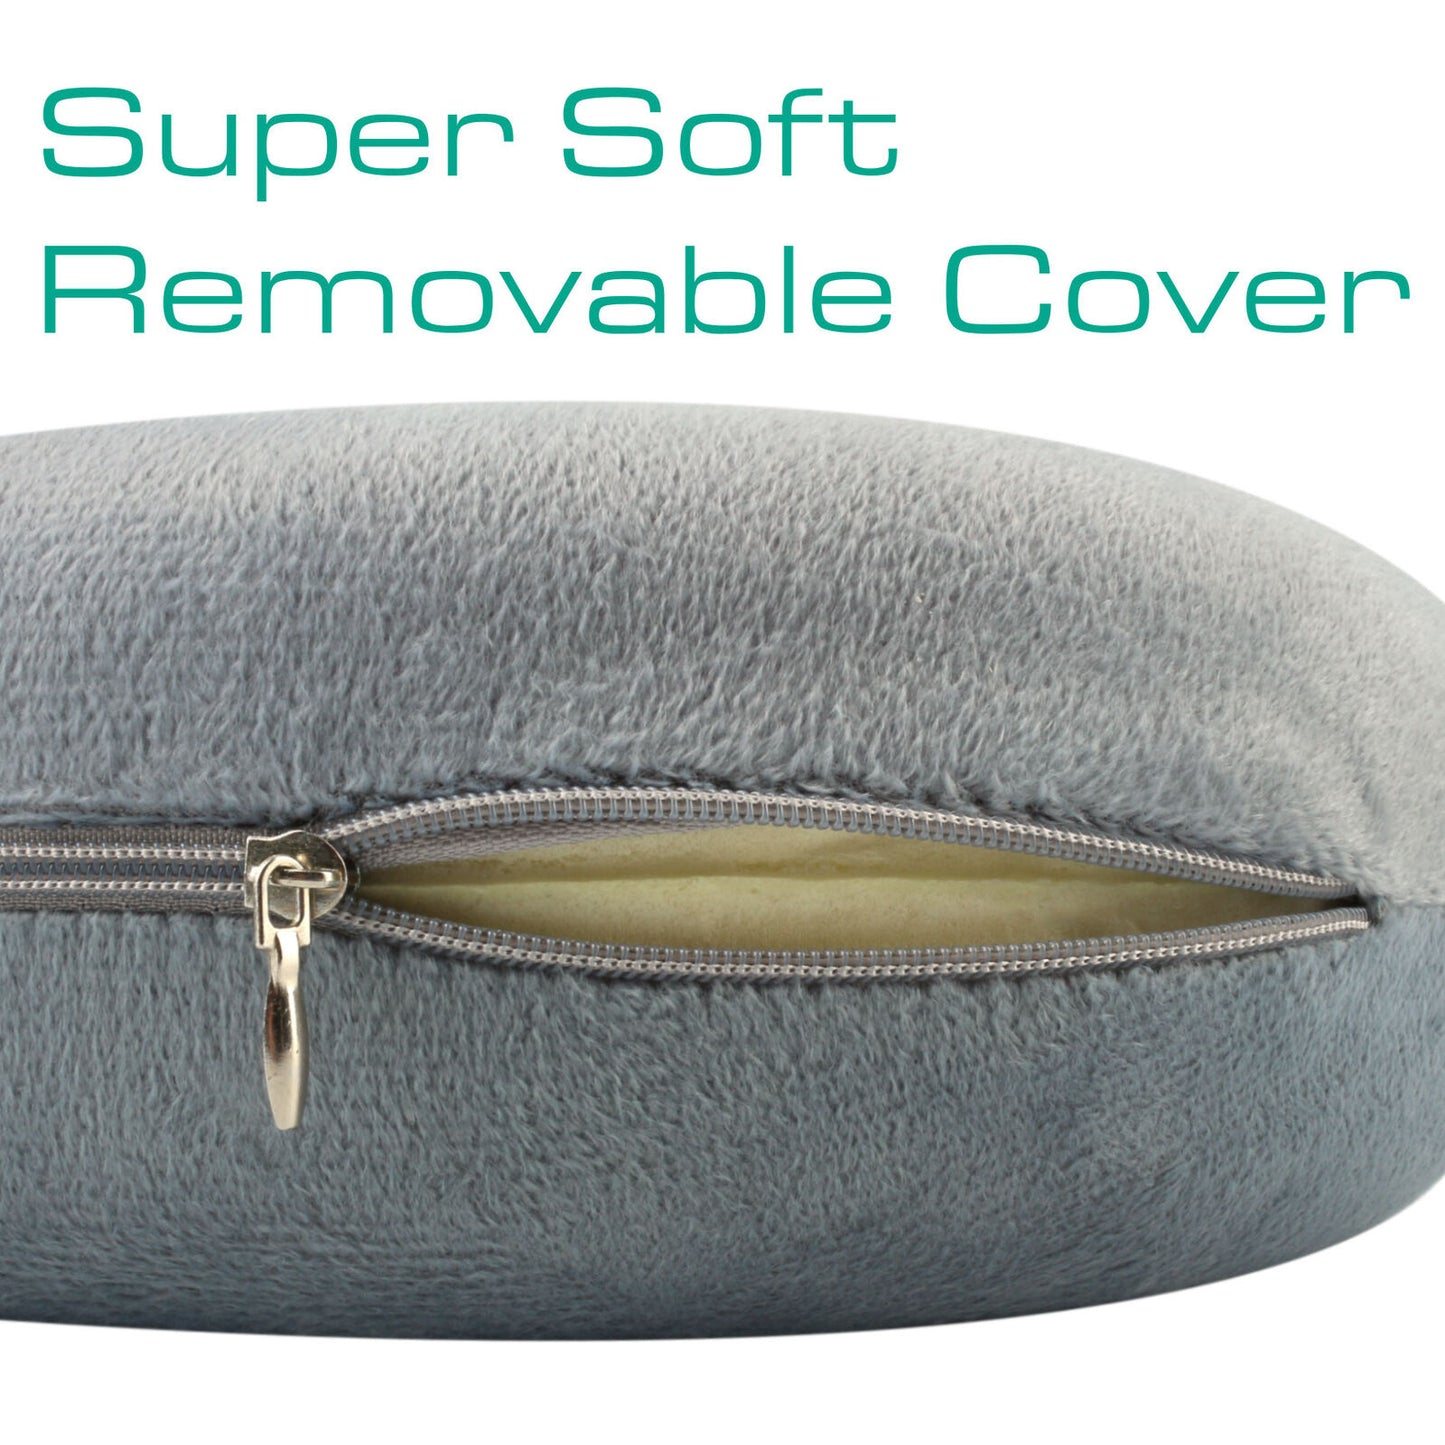 TRAVEL PILLOW Memory Foam Neck Head Support Removeable Cover Soft Grey U Shaped